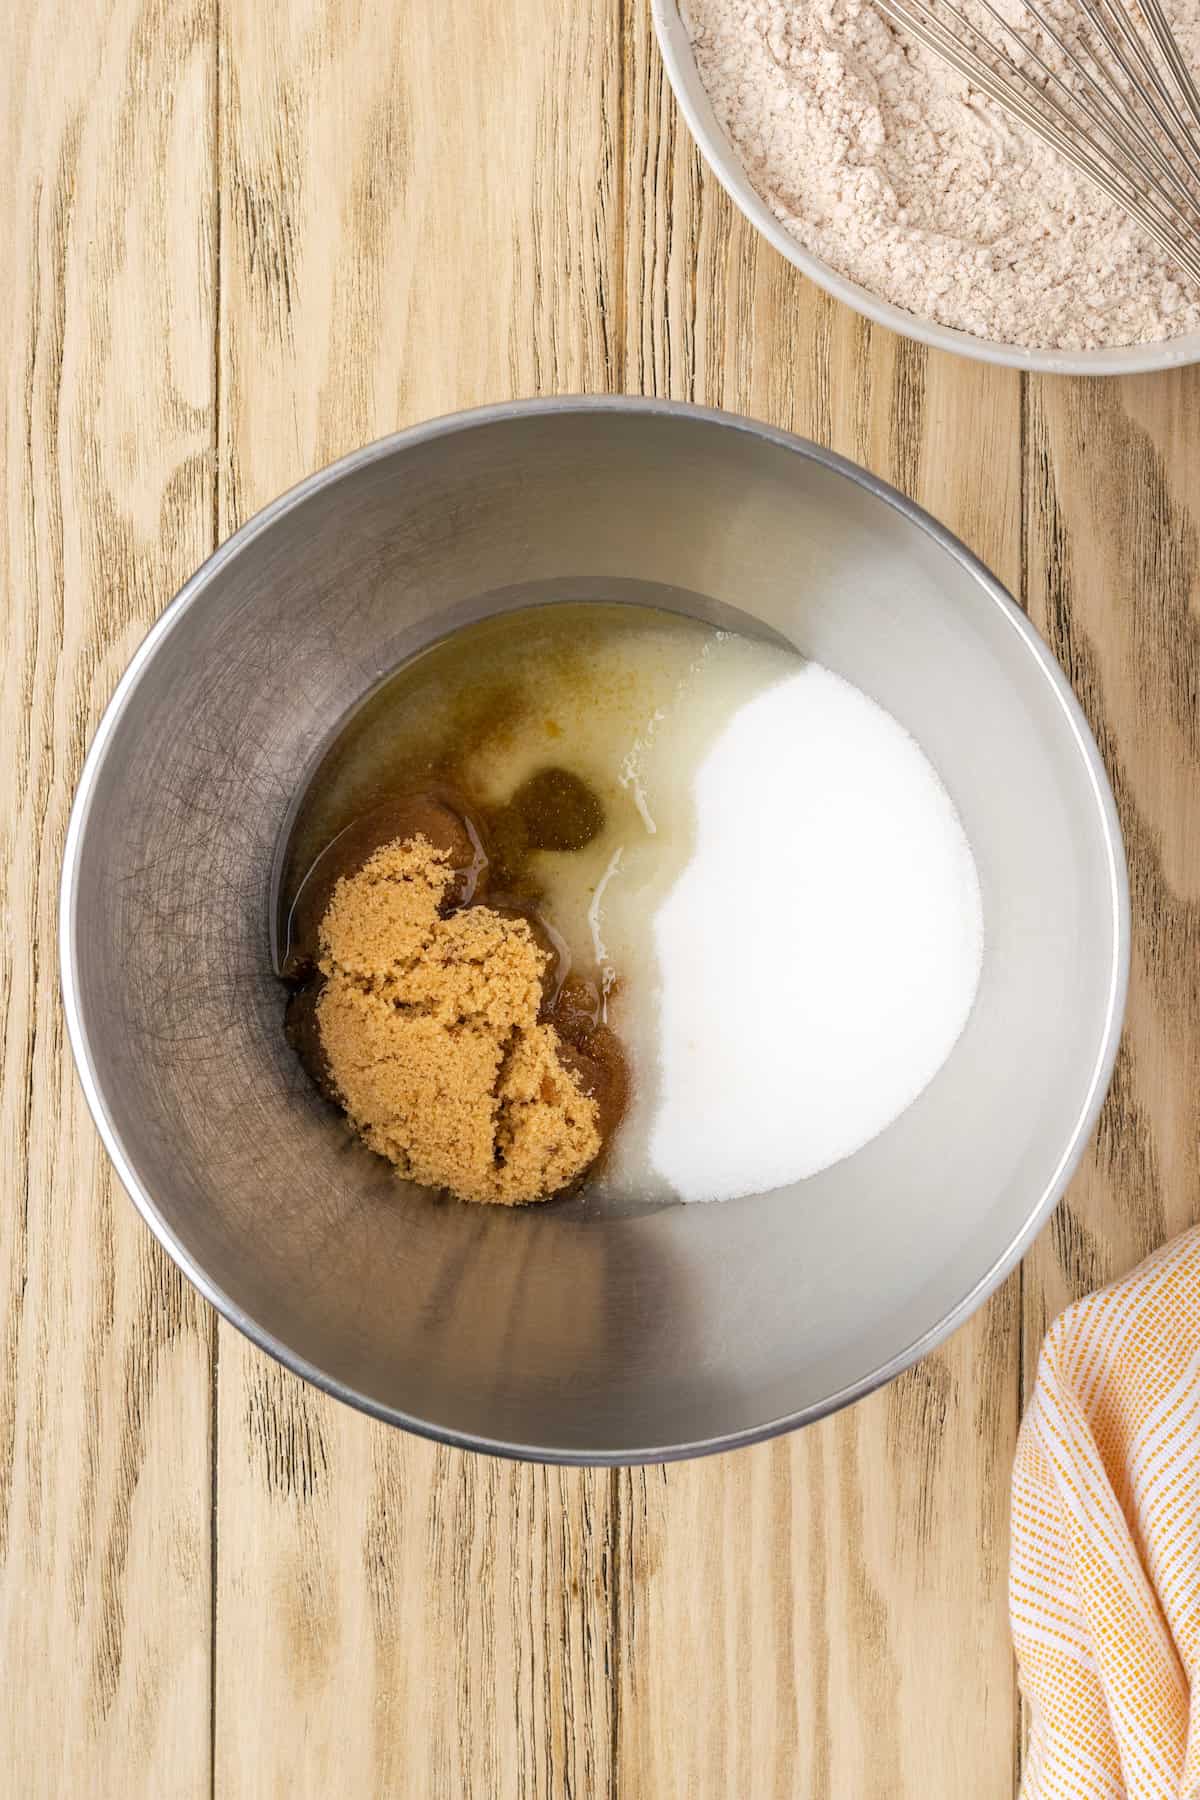 Sugar combined with the wet ingredients for carrot cake batter in a metal mixing bowl.